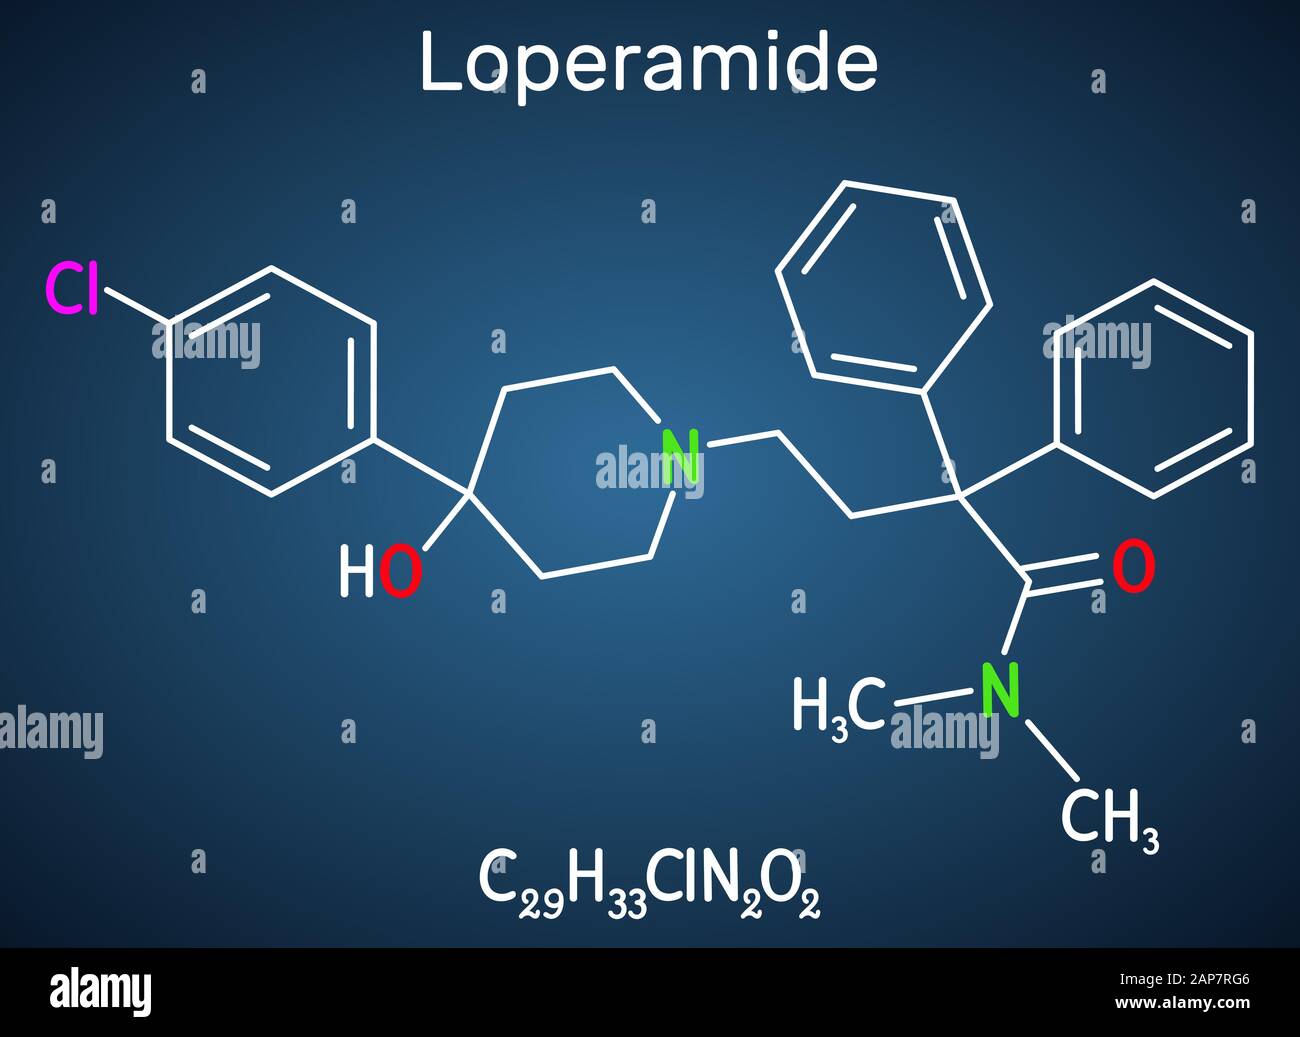 Loperamide, long-acting synthetic antidiarrheal molecule. Structural chemical formula on the dark blue background. Vector illustration Stock Vector